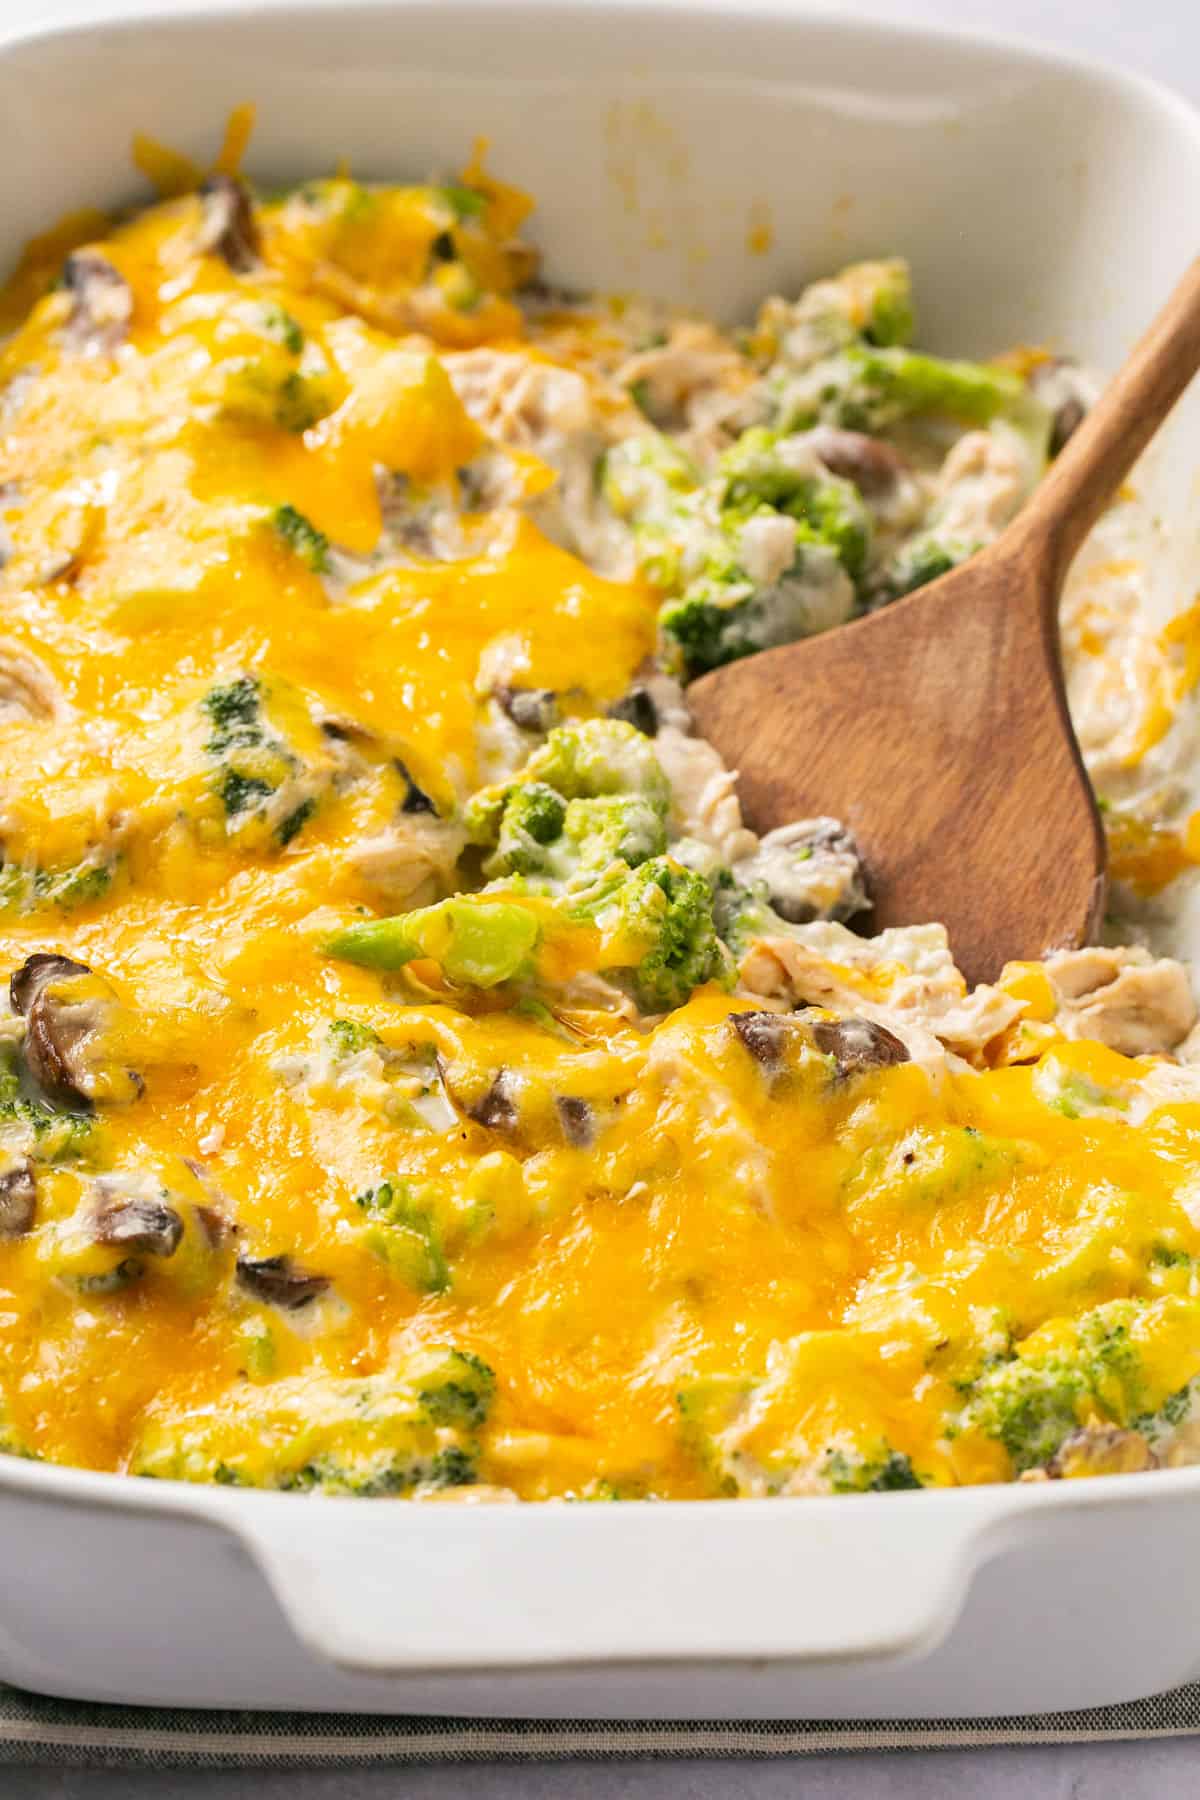 Easy Homemade Low Carb Chicken Broccoli Casserole (High Protein)